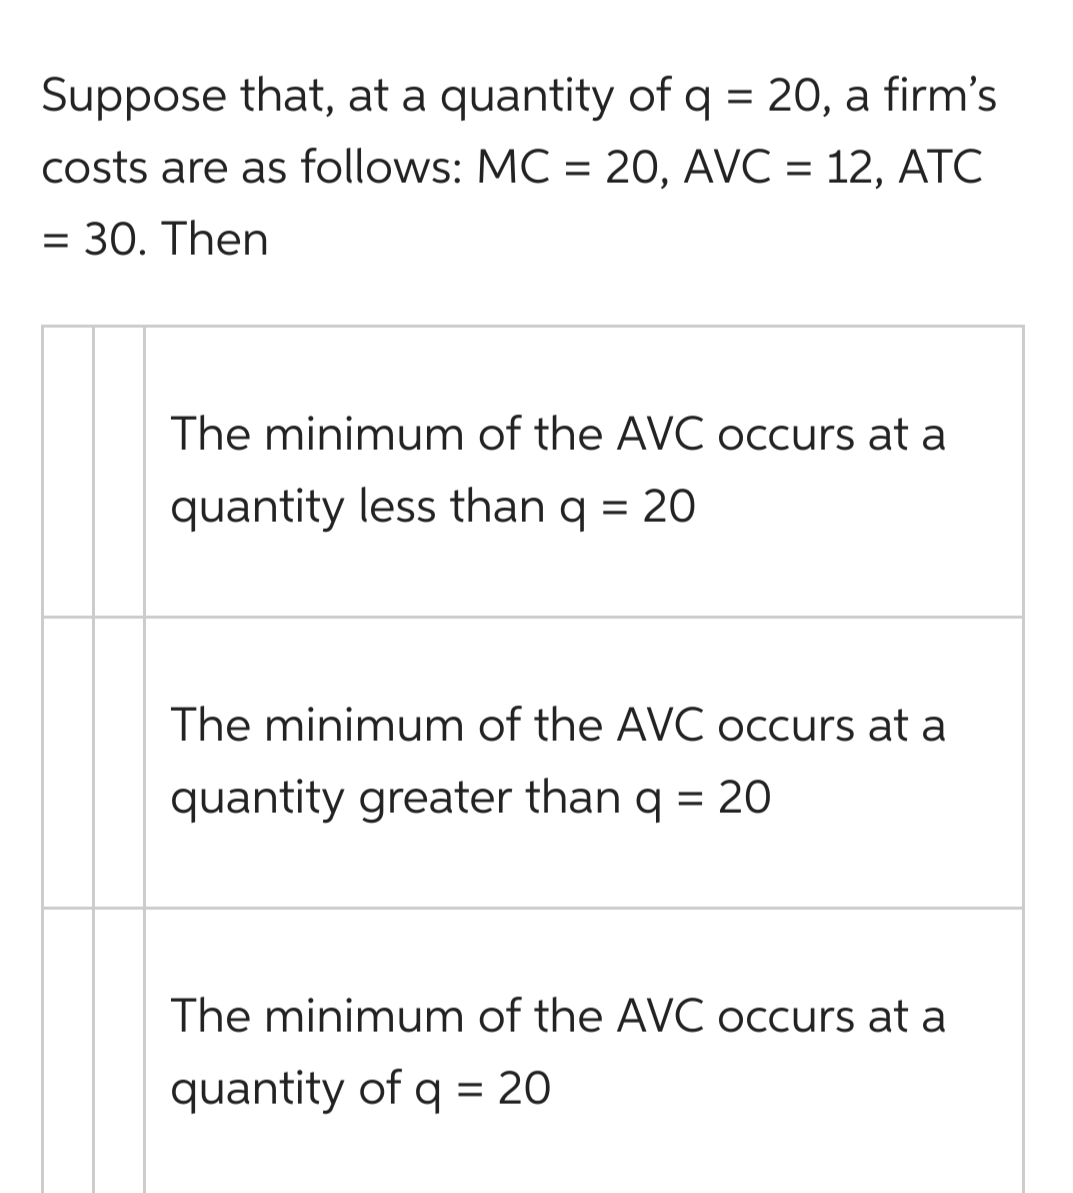 Suppose that, at a quantity of q = 20, a firm's
costs are as follows: MC = 20, AVC = 12, ATC
= 30. Then
The minimum of the AVC occurs at a
quantity less than q = 20
The minimum of the AVC occurs at a
quantity greater than q = 20
The minimum of the AVC occurs at a
quantity of q = 20